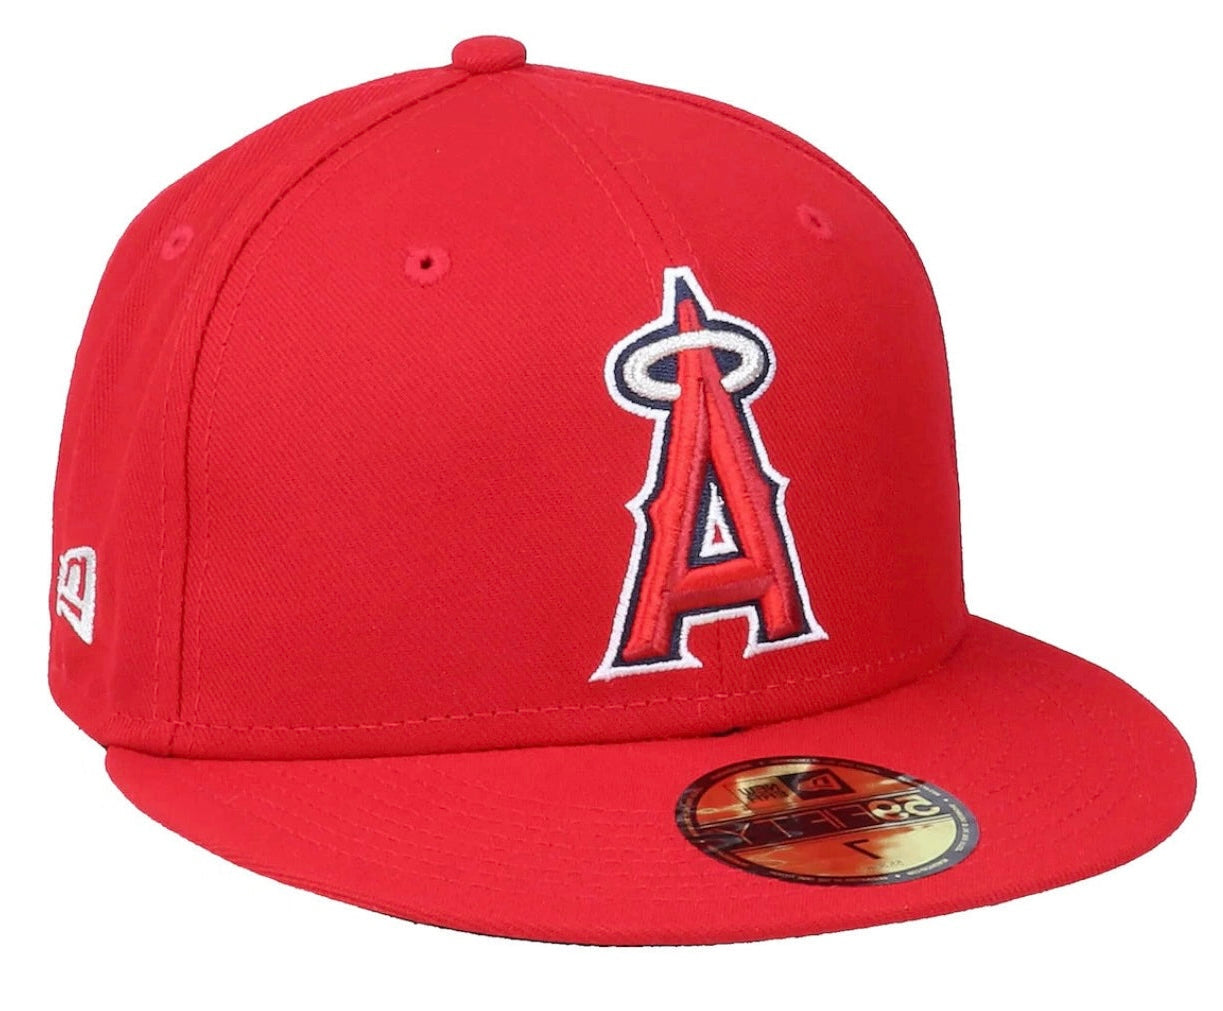 Los Angeles Angels Authentic On-Field 59Fifty Red Fitted
Cap - New Era